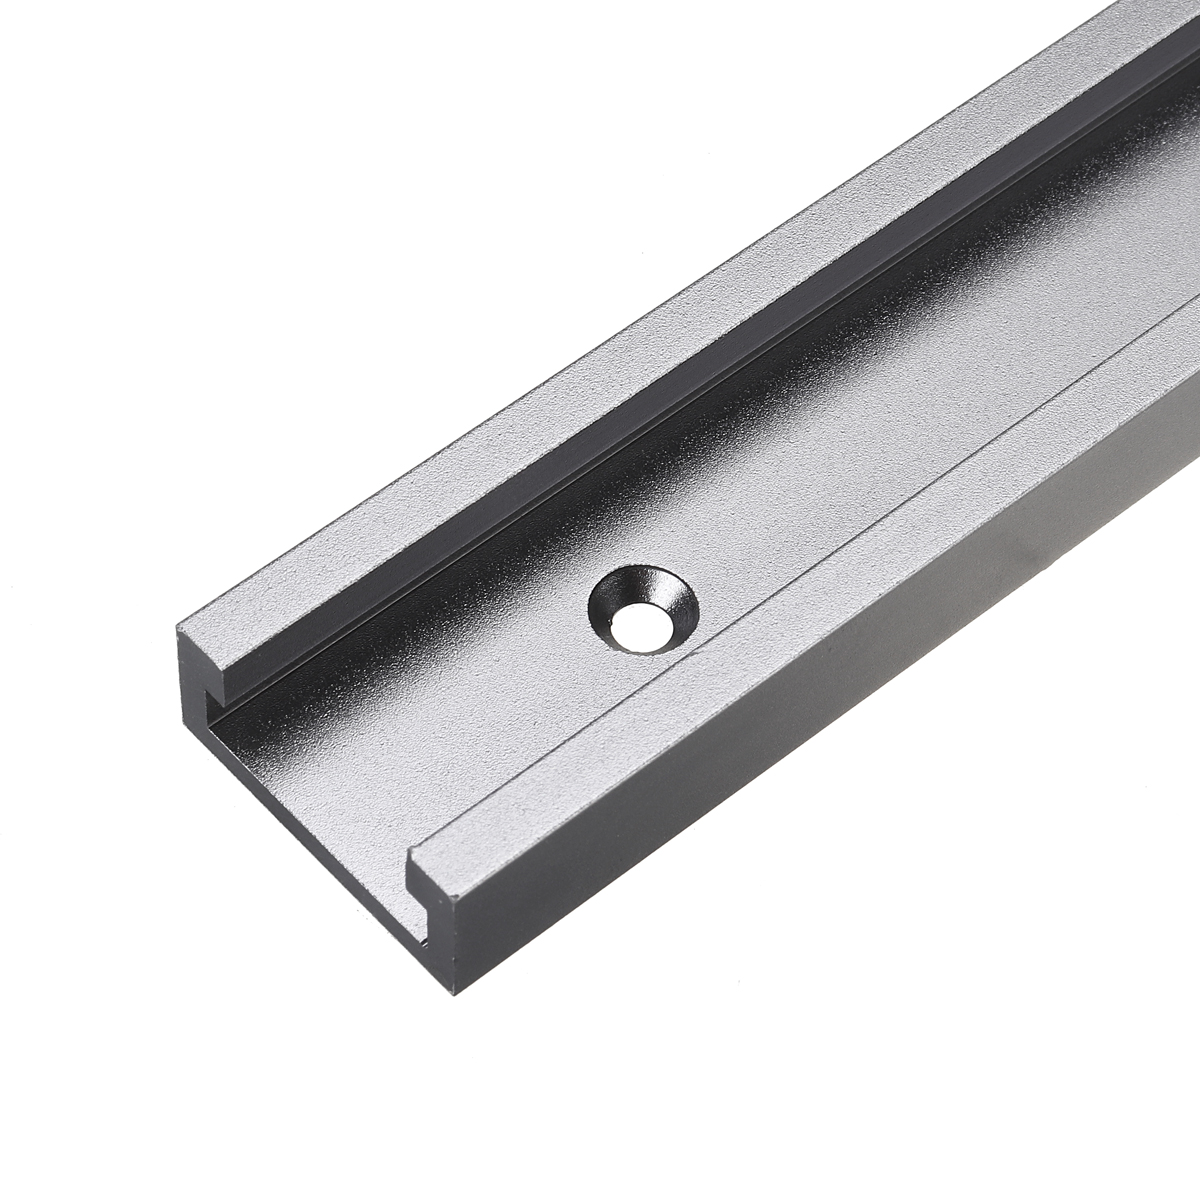 300mm-to-1220mm-Grey-T-Track-with-Predrilled-Mounting-Holes-30mm-x-128mm-Miter-Slot-for-Saw-Router-T-1810952-8